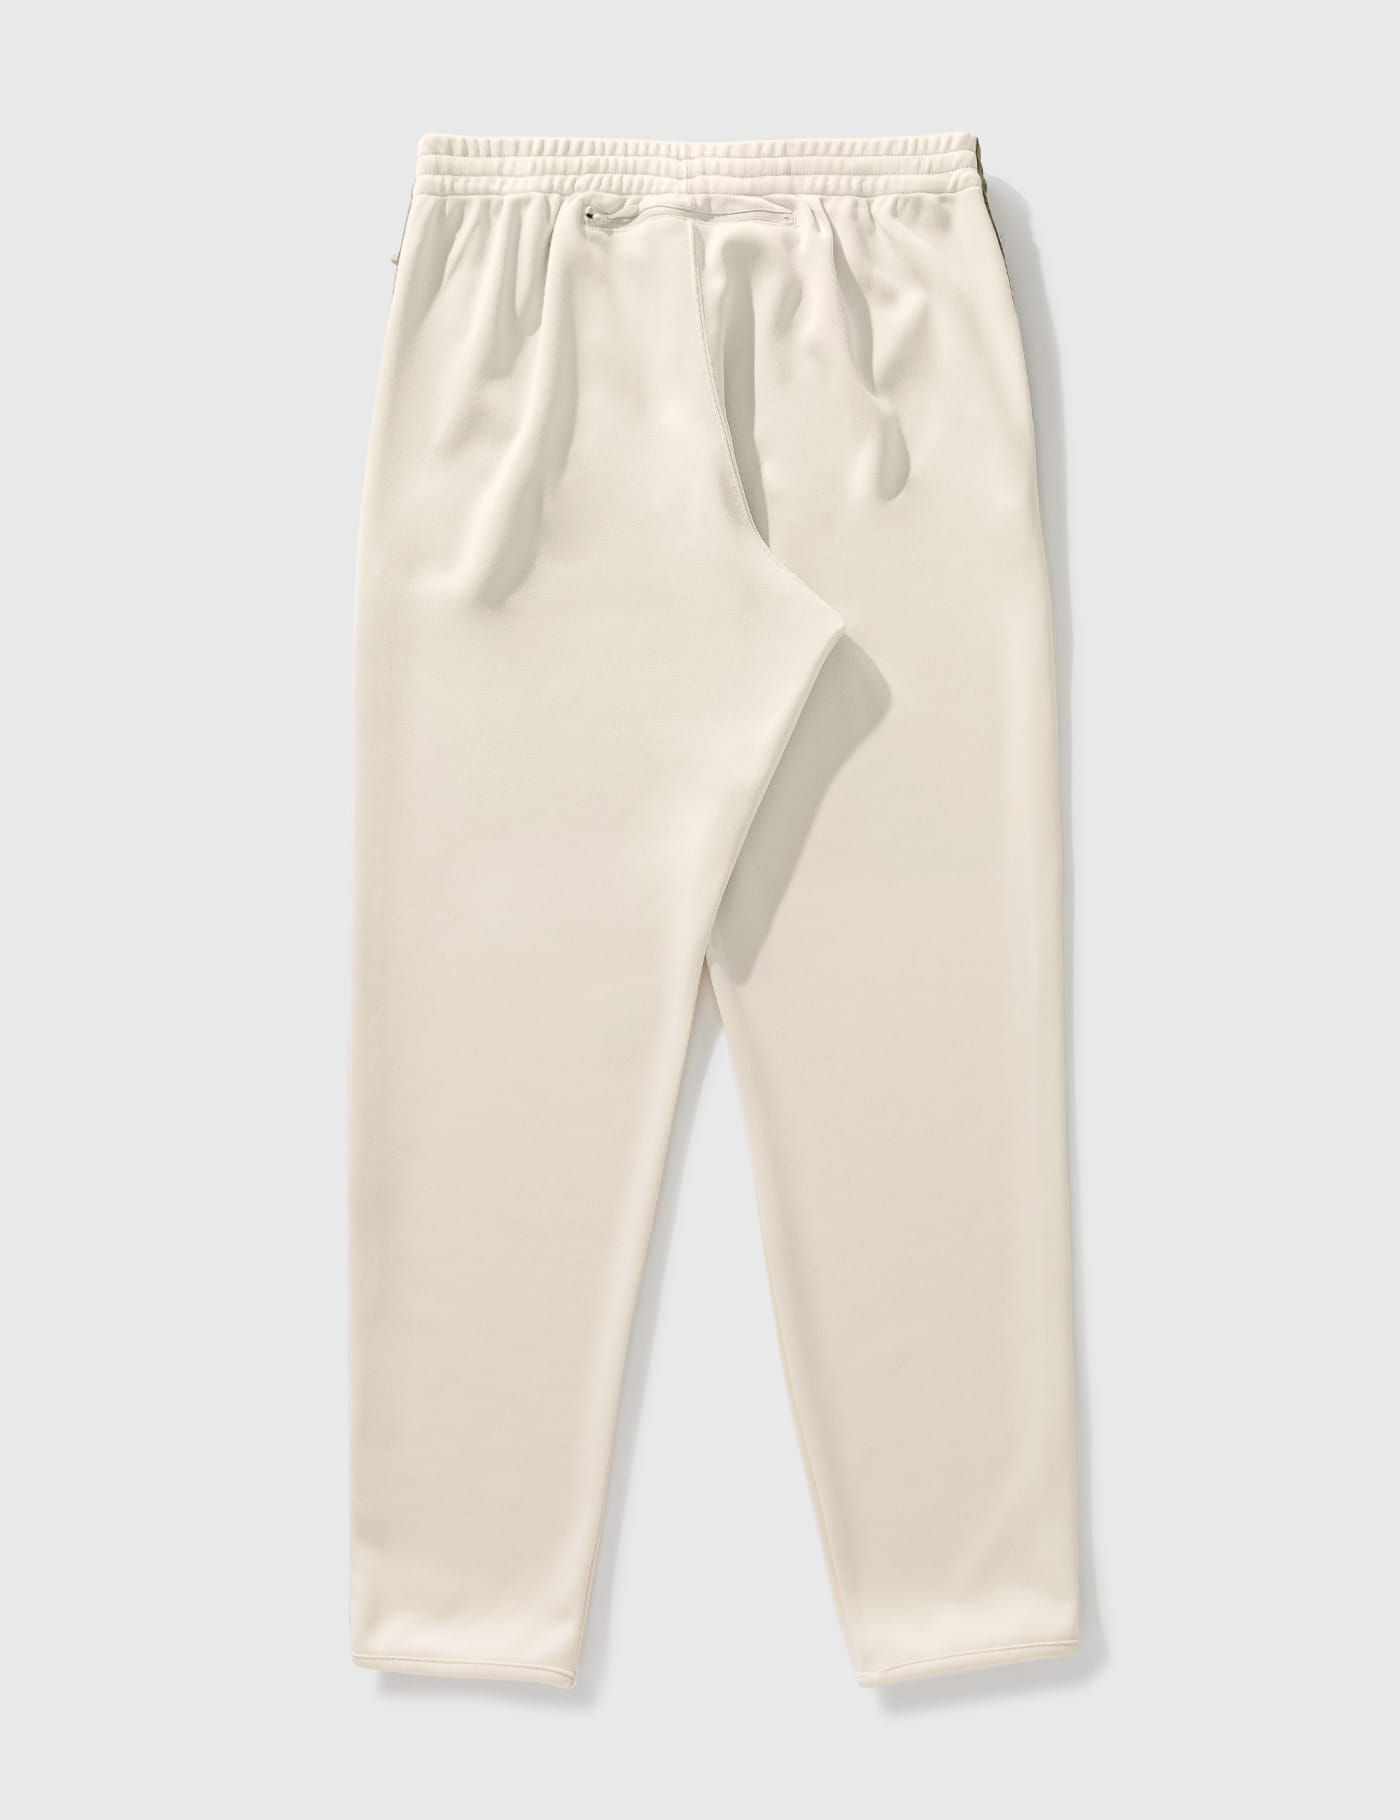 Trainer Pants In White